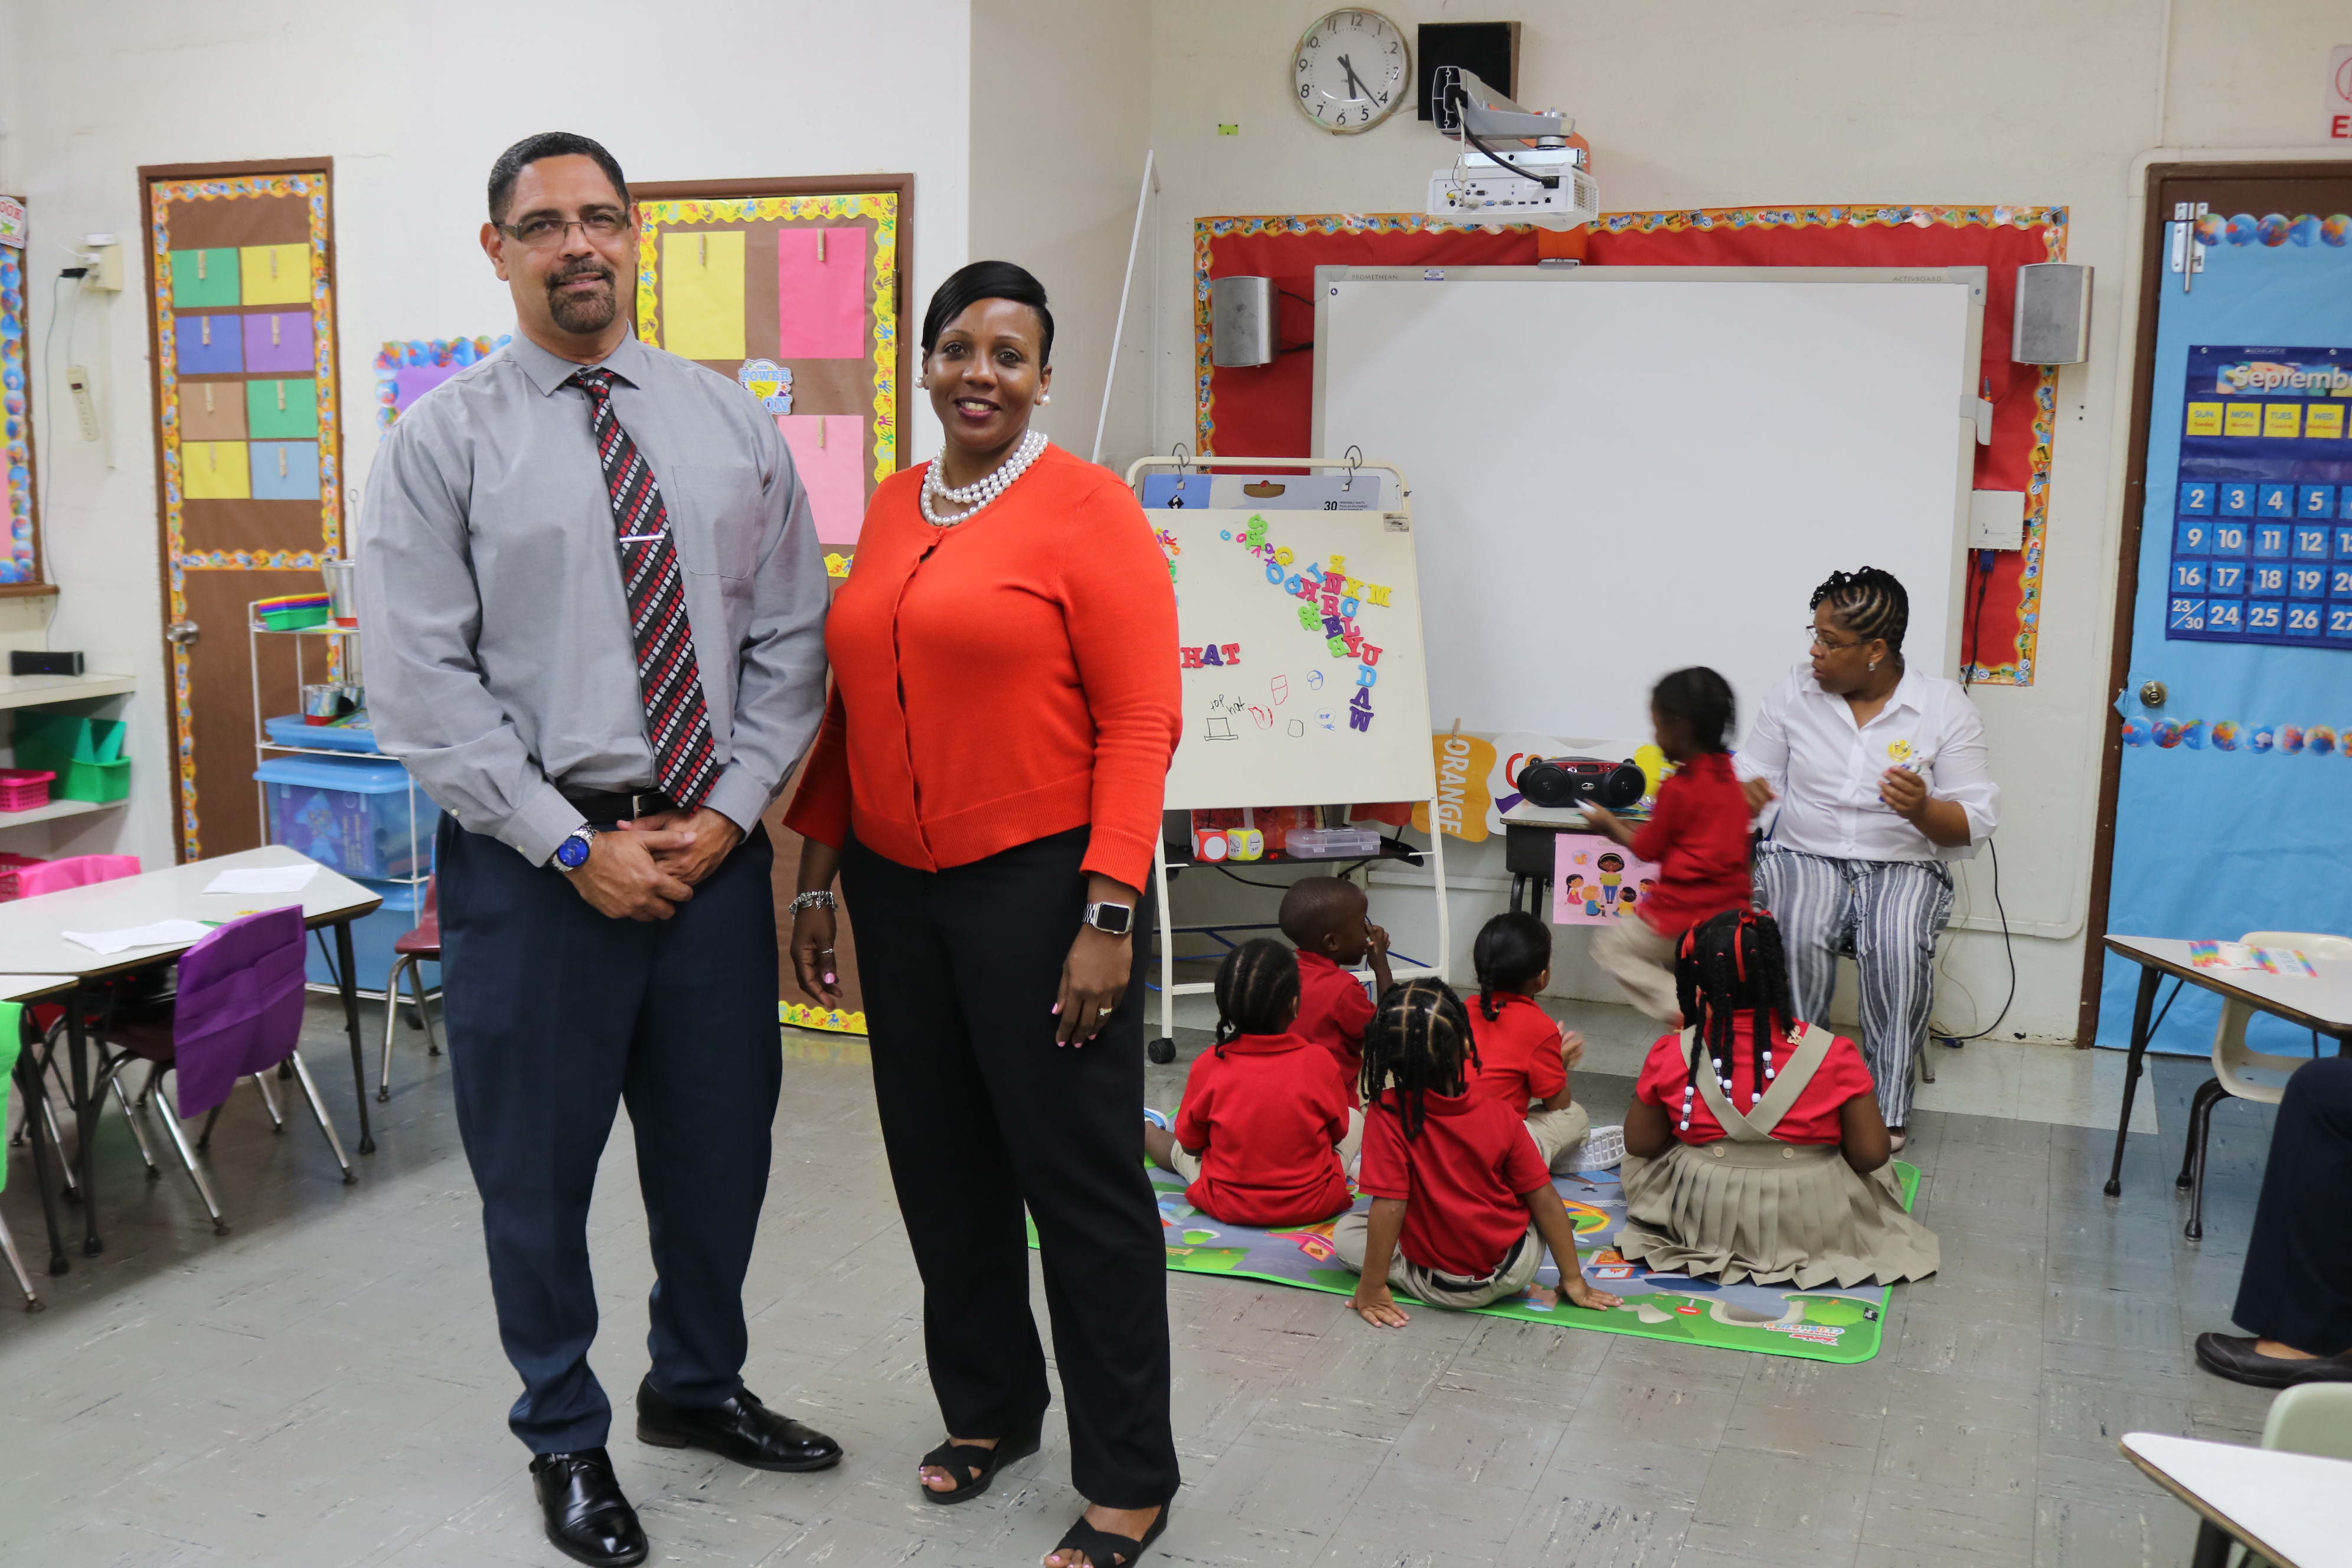 Jeselle Cruse-Peter, St. Croix District's Elementary Programs Coordinator and Jose Perez, St. Croix District's Language Acquisition Coordinator .JPG